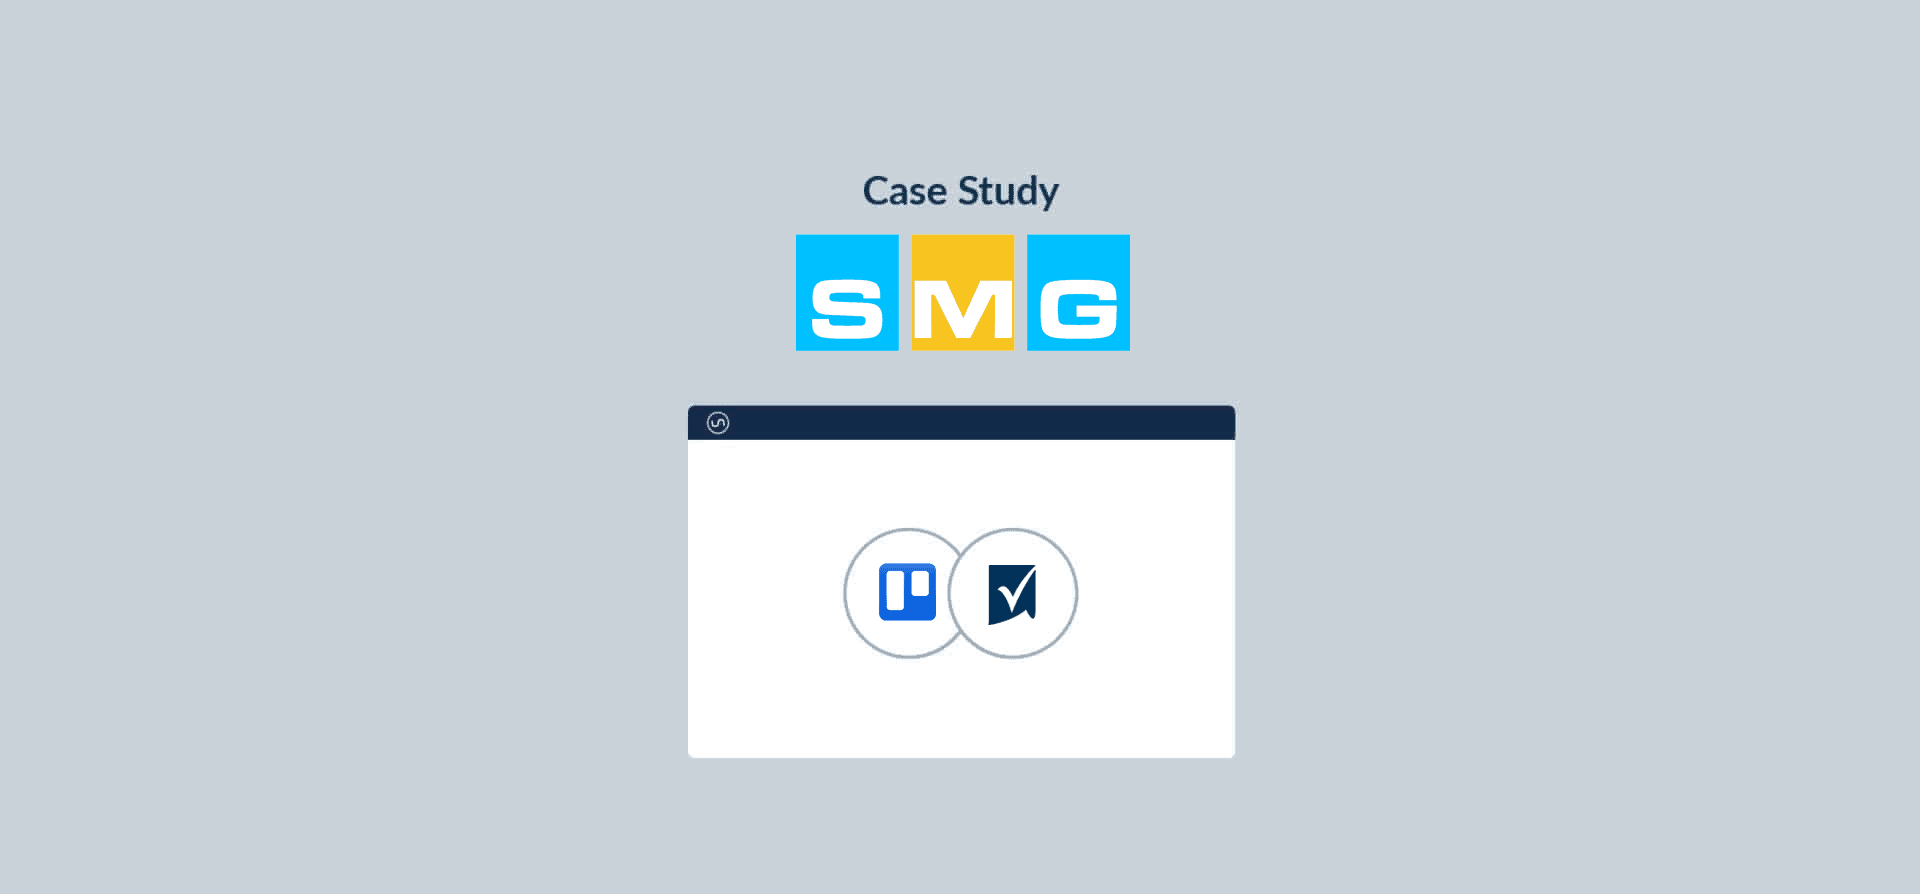 Logos for Trello, Smartsheet, and SMG Bahamas, with the words Case Study written above